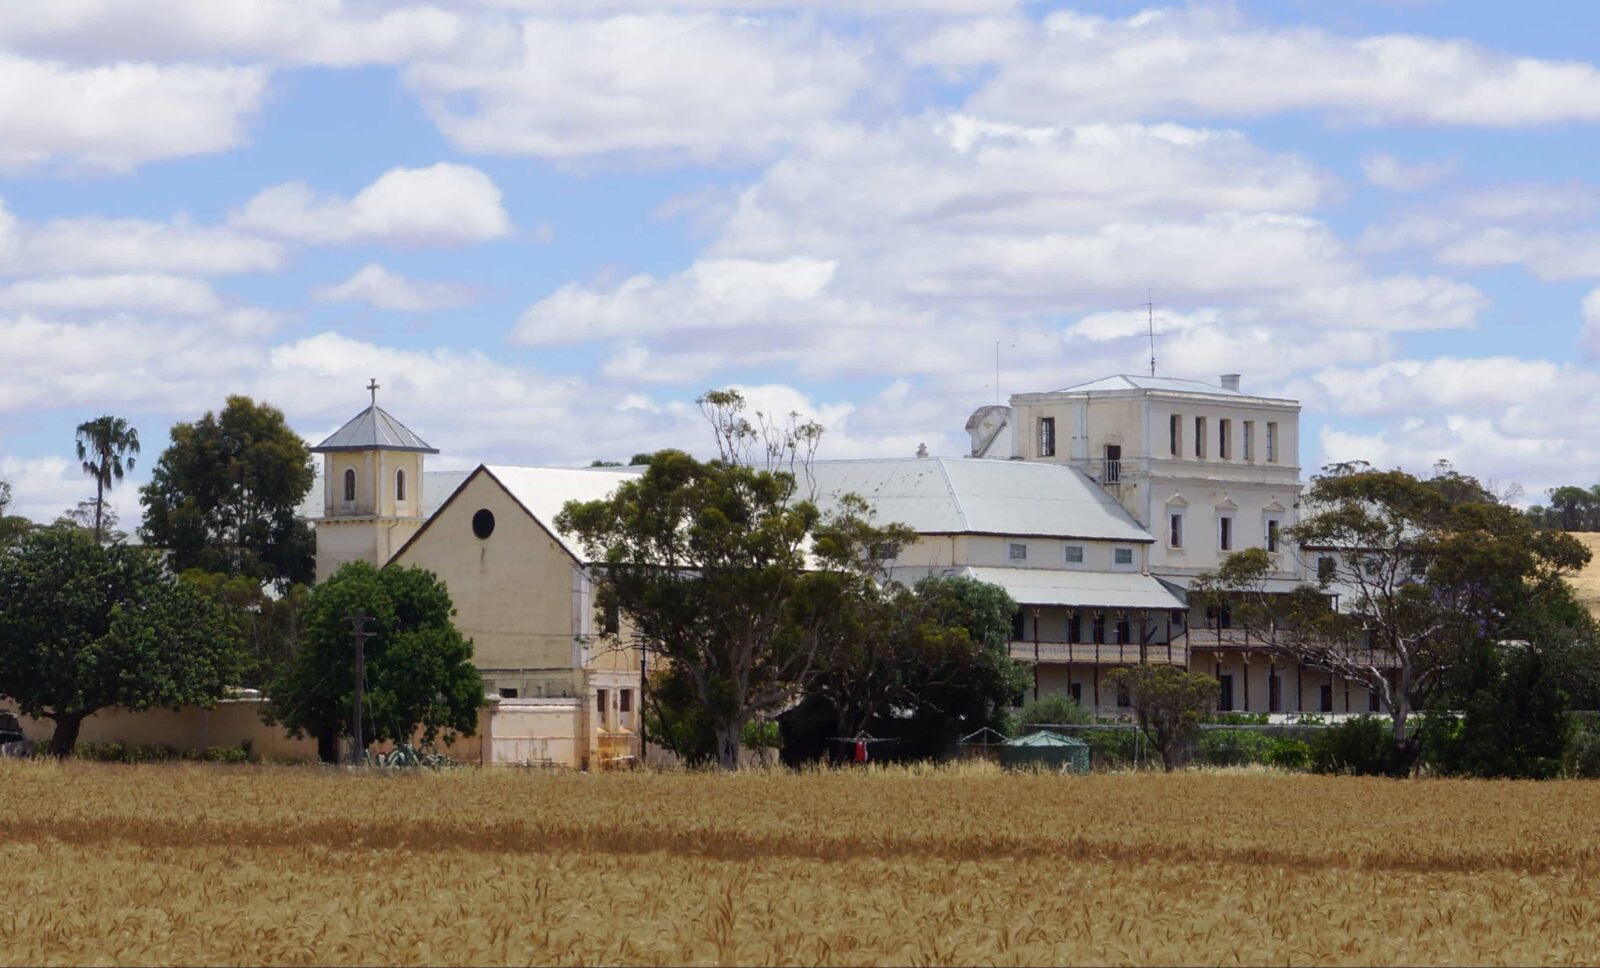 New Norcia Monastery Guesthouse, New Norcia, Western Australia